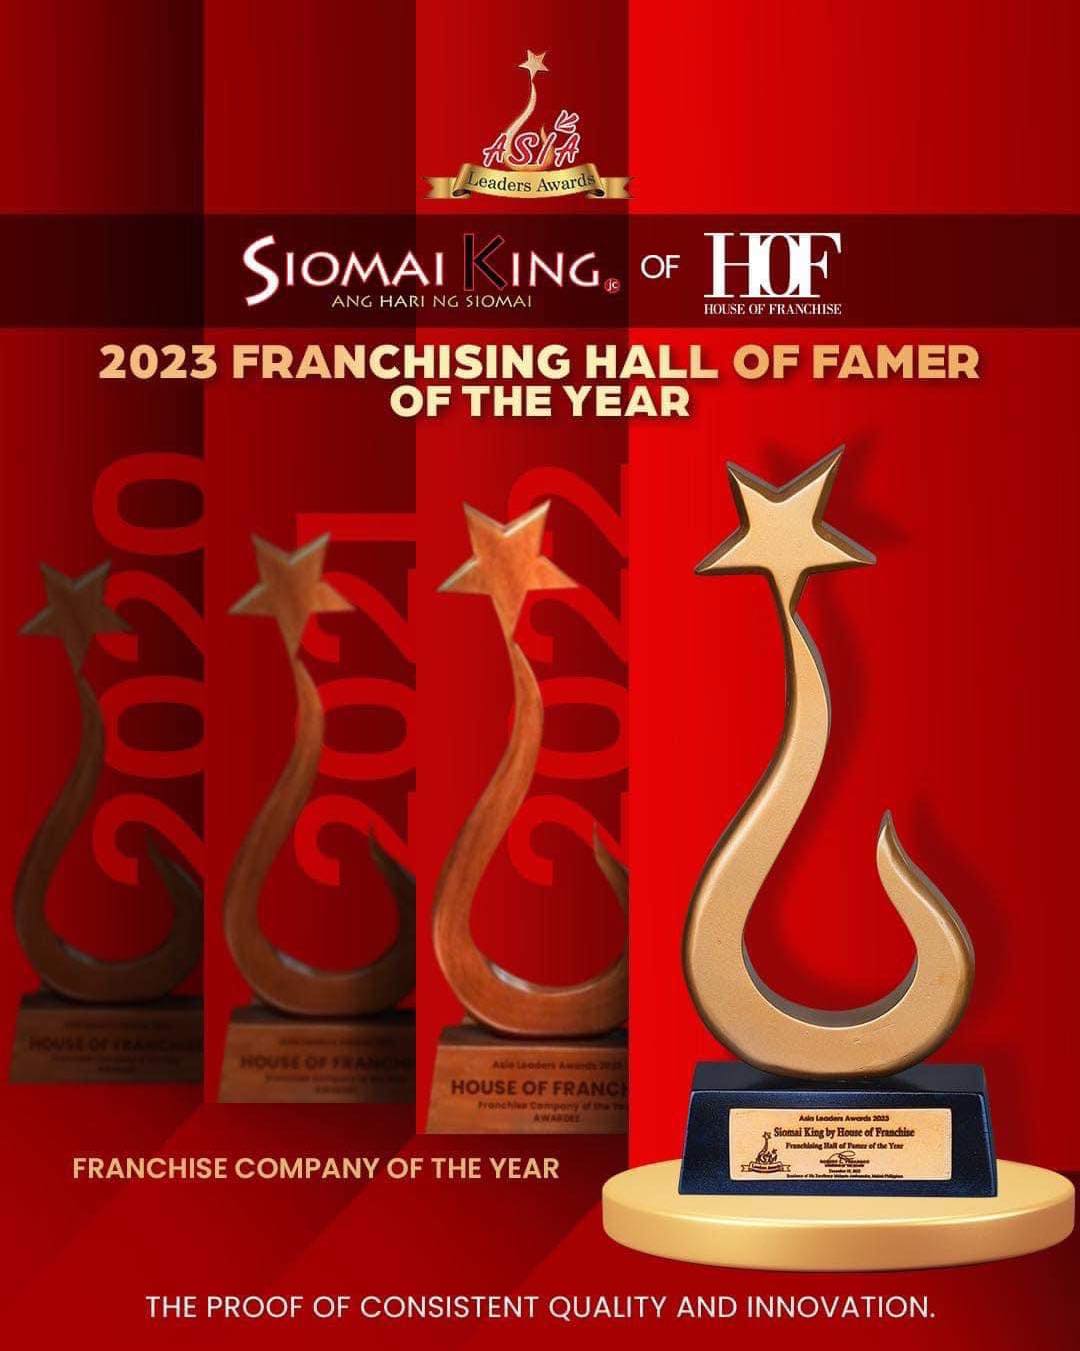 You are currently viewing Siomai King, the Franchising Hall of Famer of the Year 2023